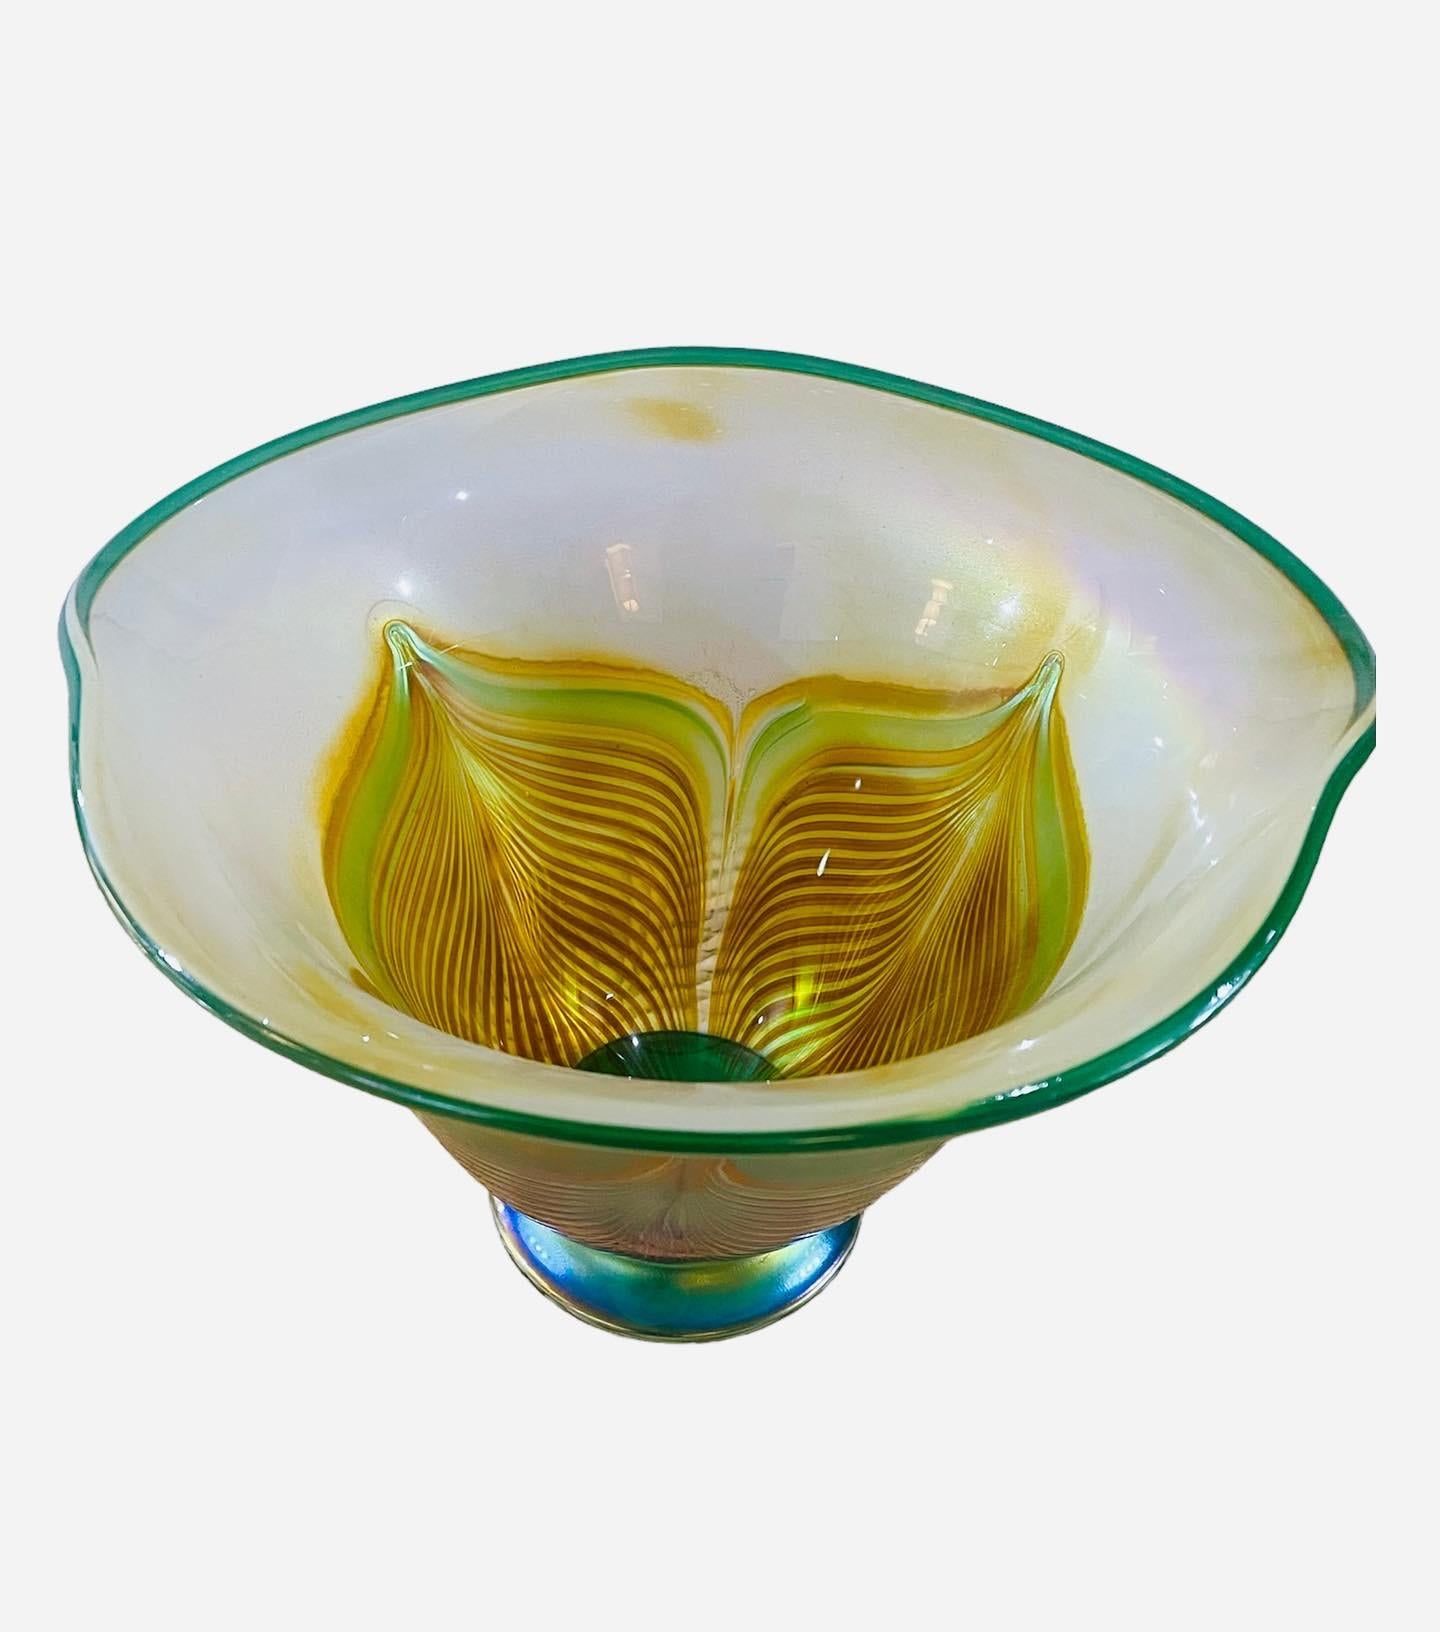 Presenting this large, Igor Muller art glass vase. Signed Vase is decorated with a greens, soft purple and yellow golds iridescent body featuring iridescent peacock blue, beautiful feathered design in art glass. Truly a stunning peice.